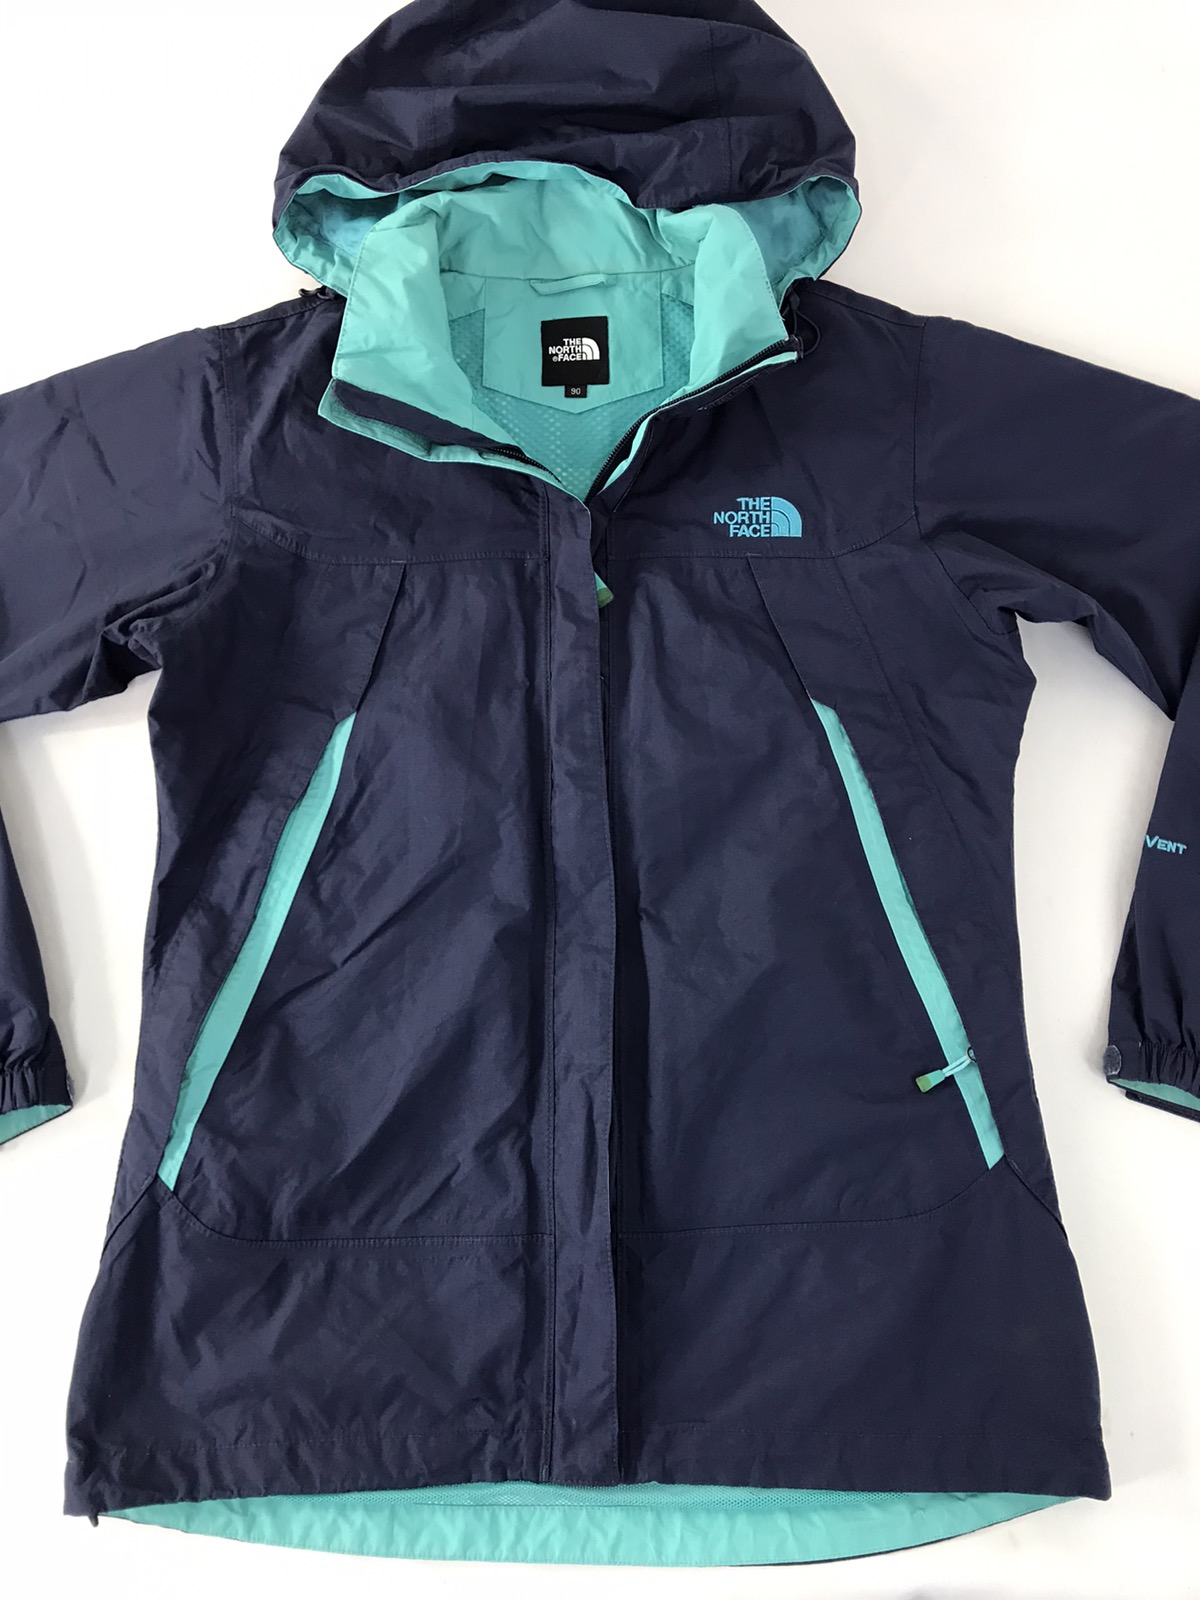 The North Face Quilted Jacket Zipper Style Outdoor Hiking - 3